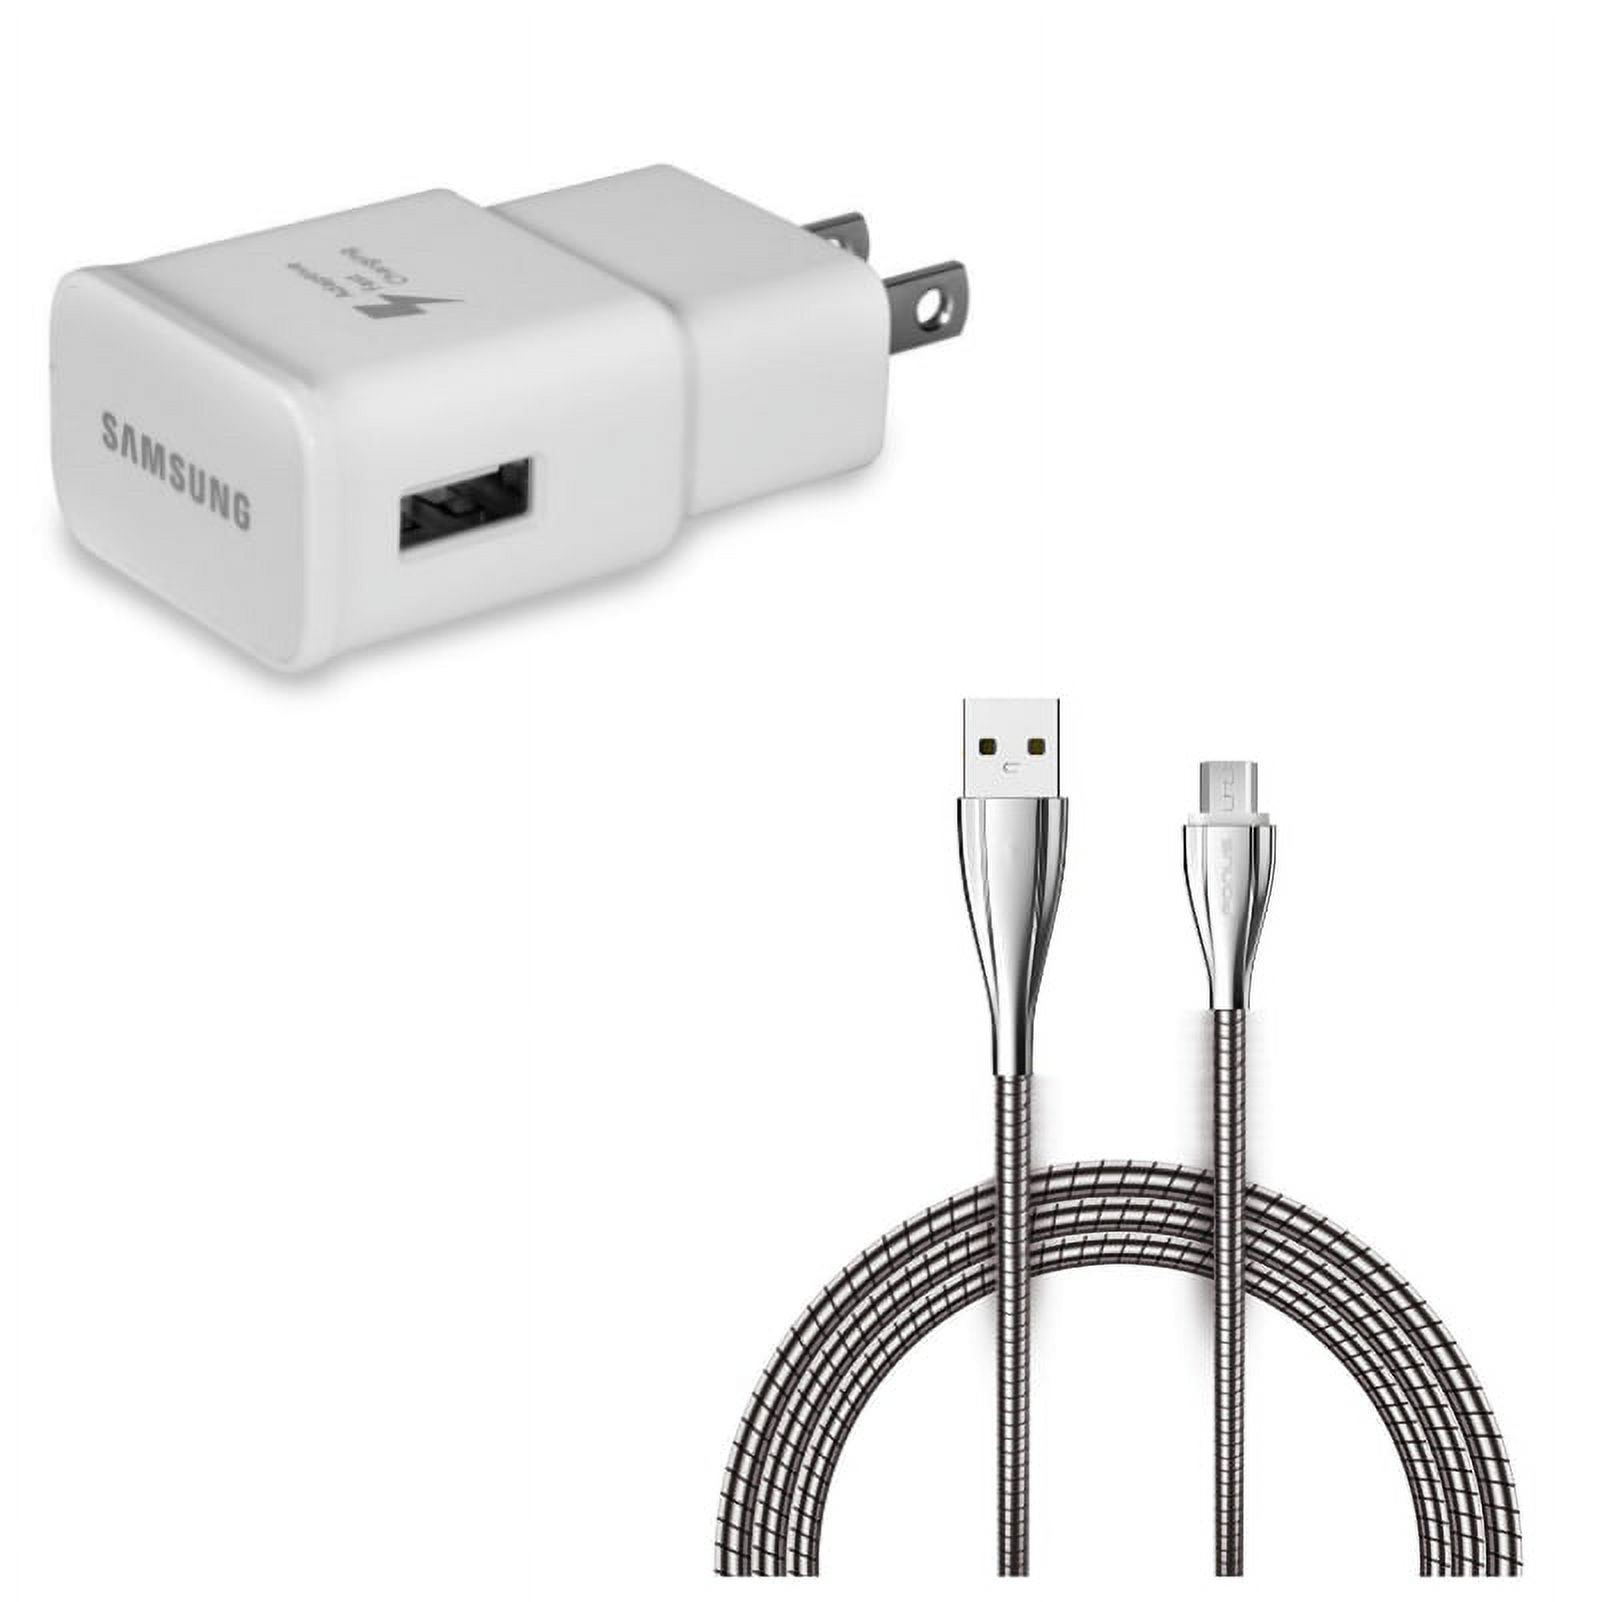 Adaptive Fast Home Charger w 6ft Metal USB Cable R1E for LG X Charge, G Stylo, Tribute Dynasty, Optimus Fuel, Flex 2, F7 F60 F3 Exceed 2, Exalt LTE, Access LTE, 5, Volt 2, Ultimate 2, 3 Plus - image 1 of 8